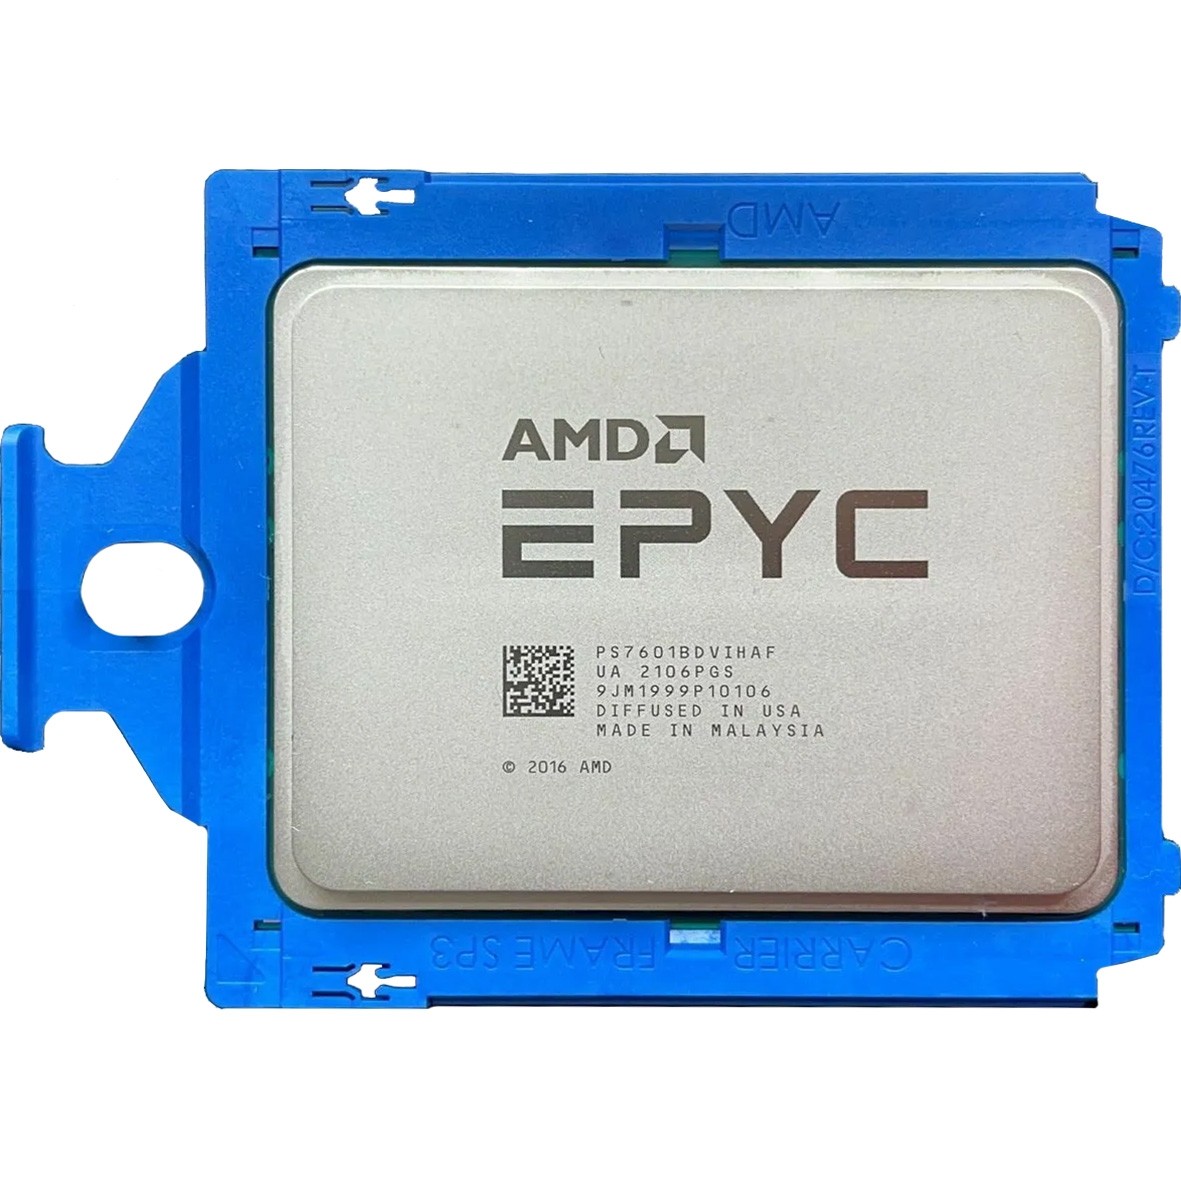 Dell Only AMD EPYC 7601 (PS7601BDVIHAF) - 32-Core 2.20GHz 64MB 180W CPU